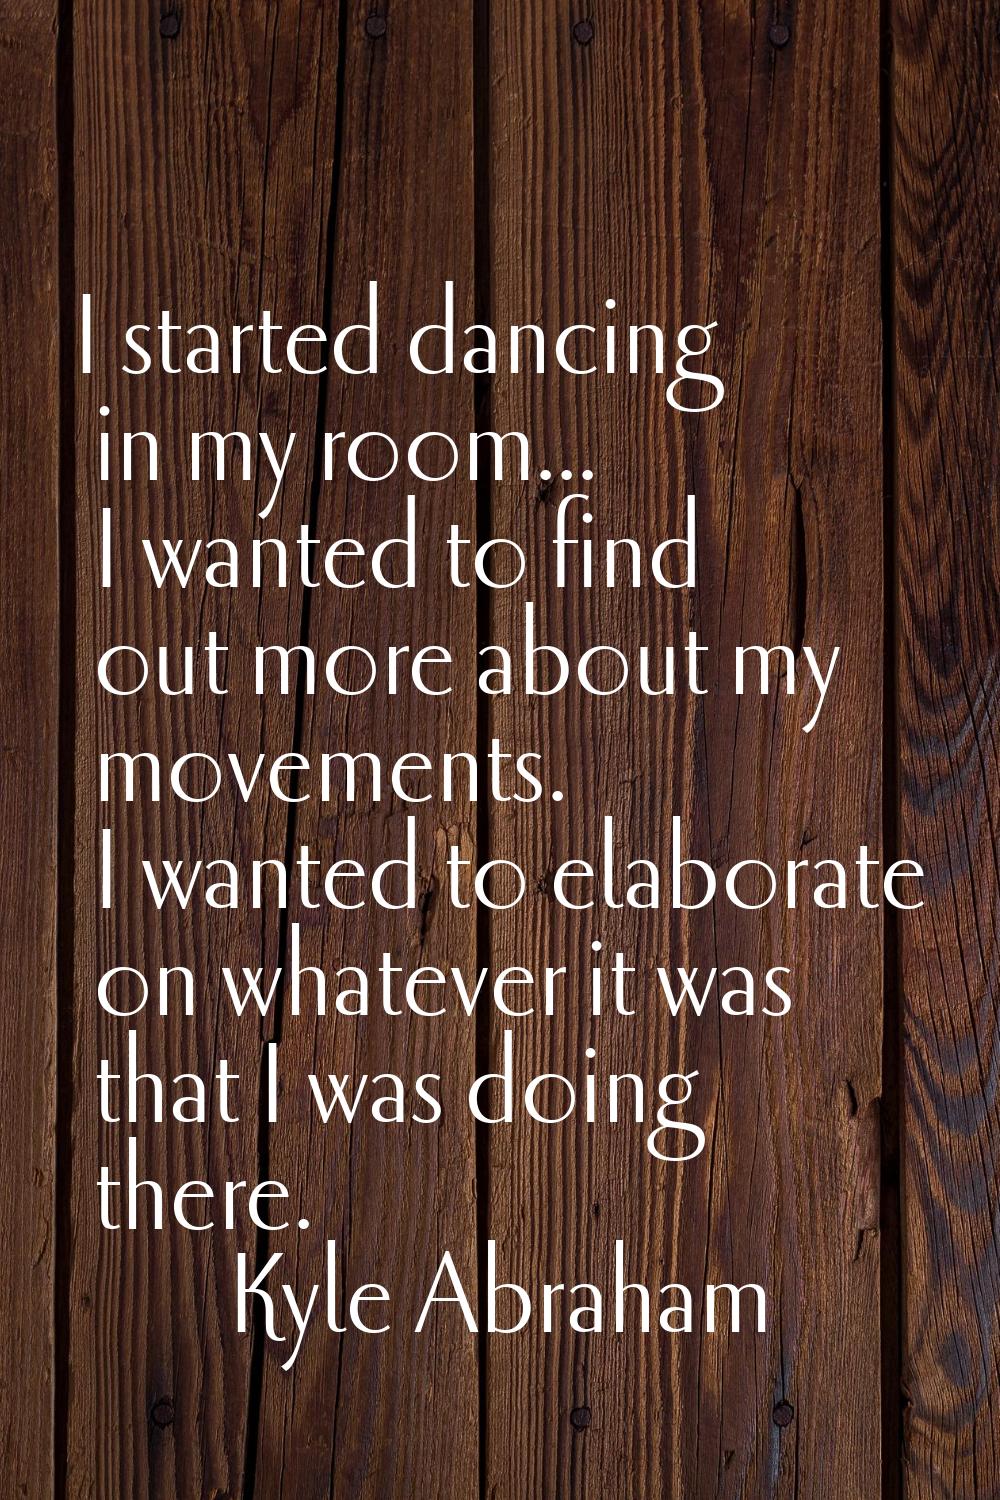 I started dancing in my room... I wanted to find out more about my movements. I wanted to elaborate